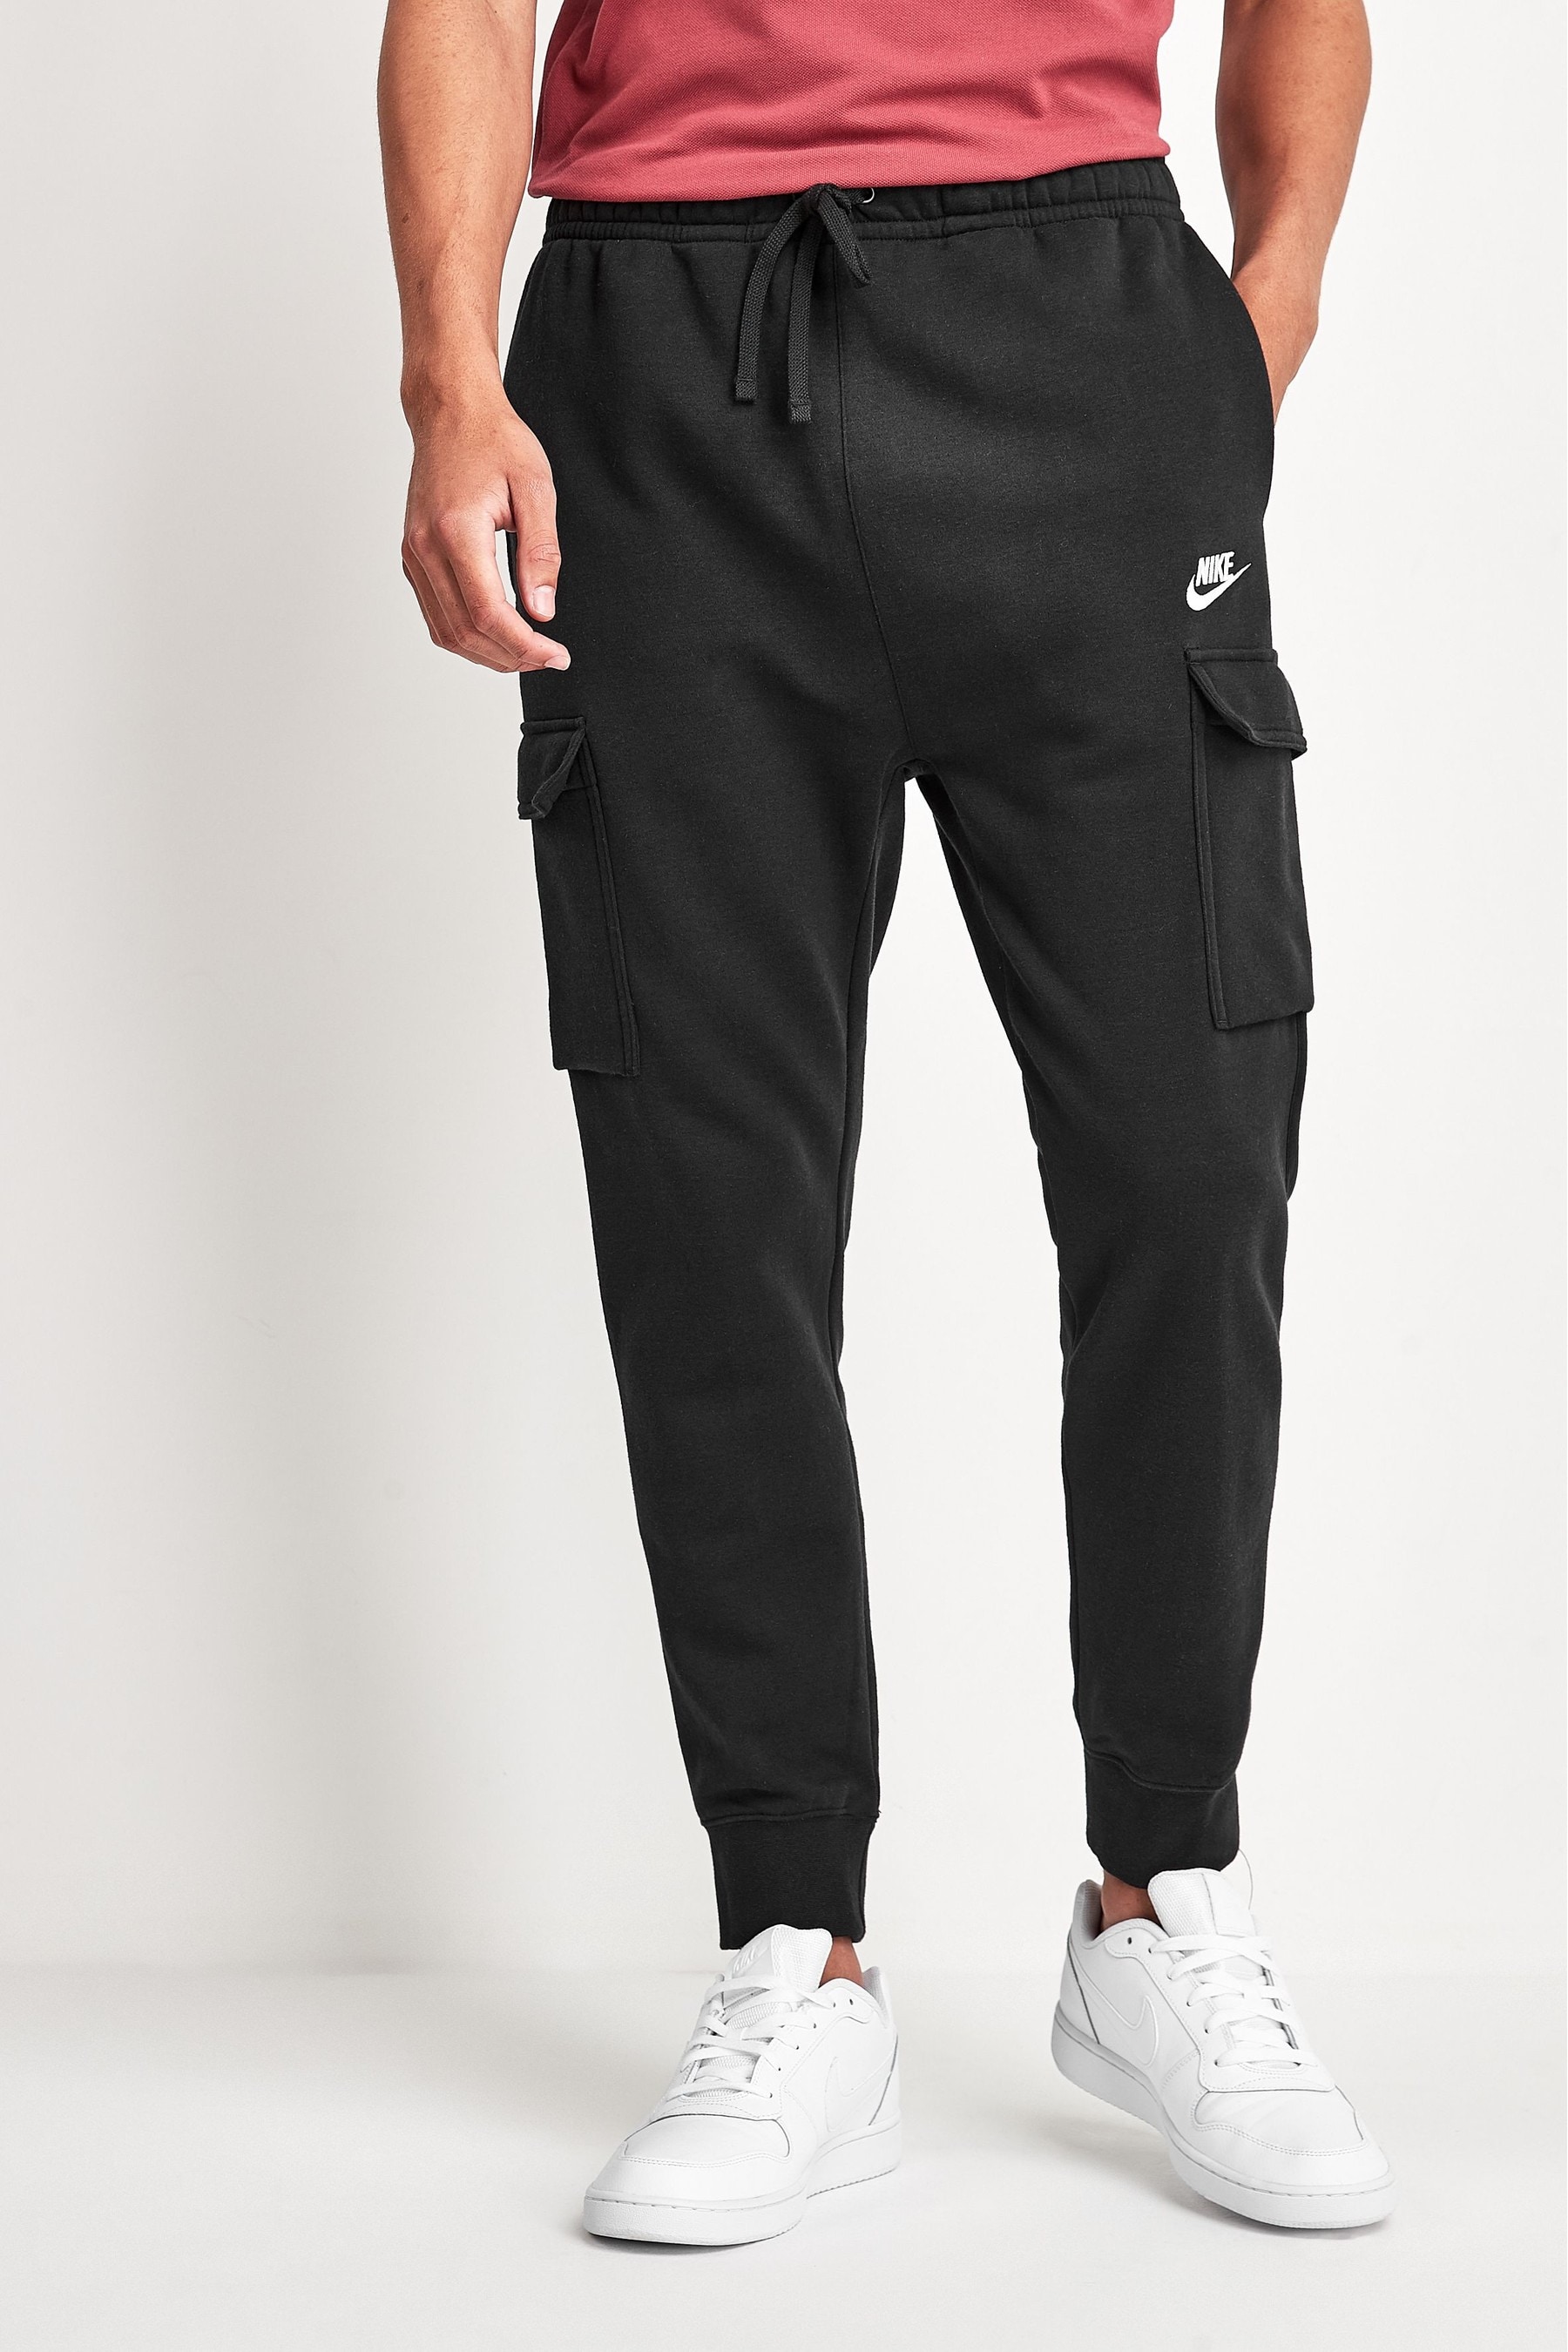 Buy Nike Club Cargo Joggers from the Next UK online shop